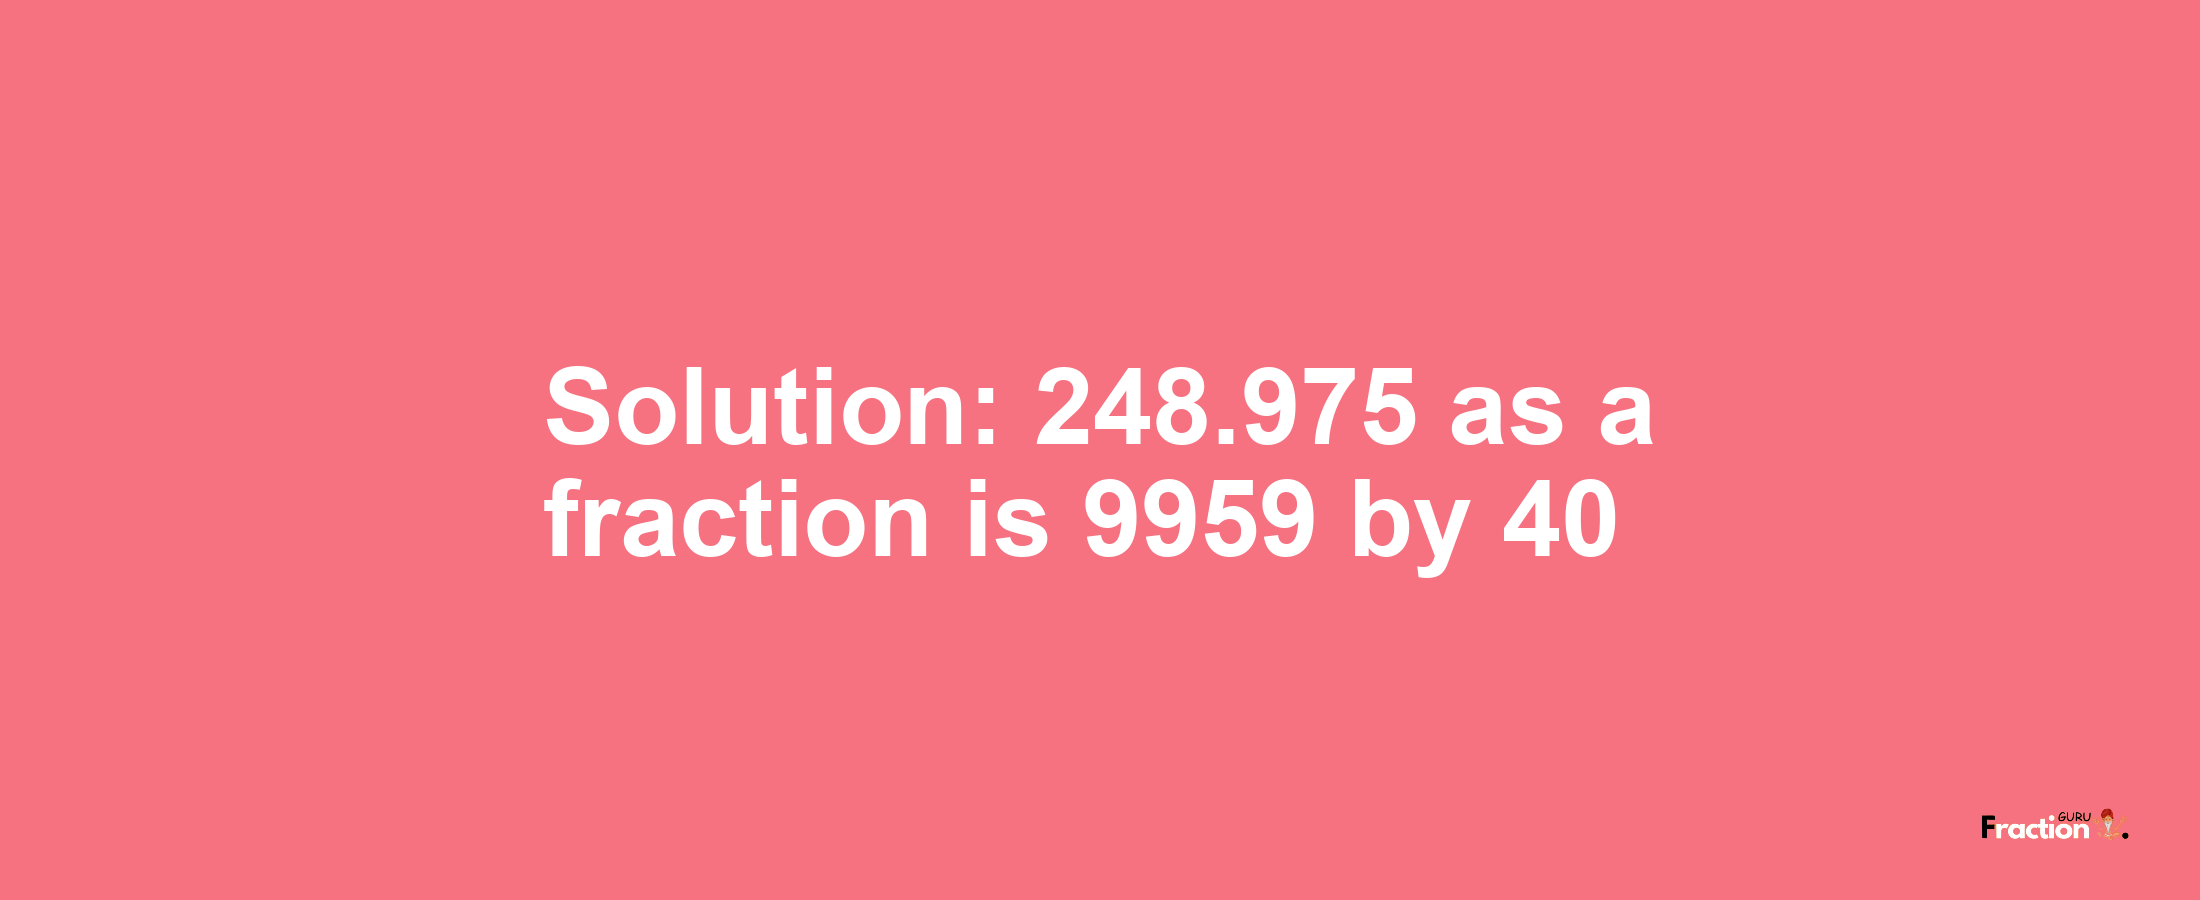 Solution:248.975 as a fraction is 9959/40